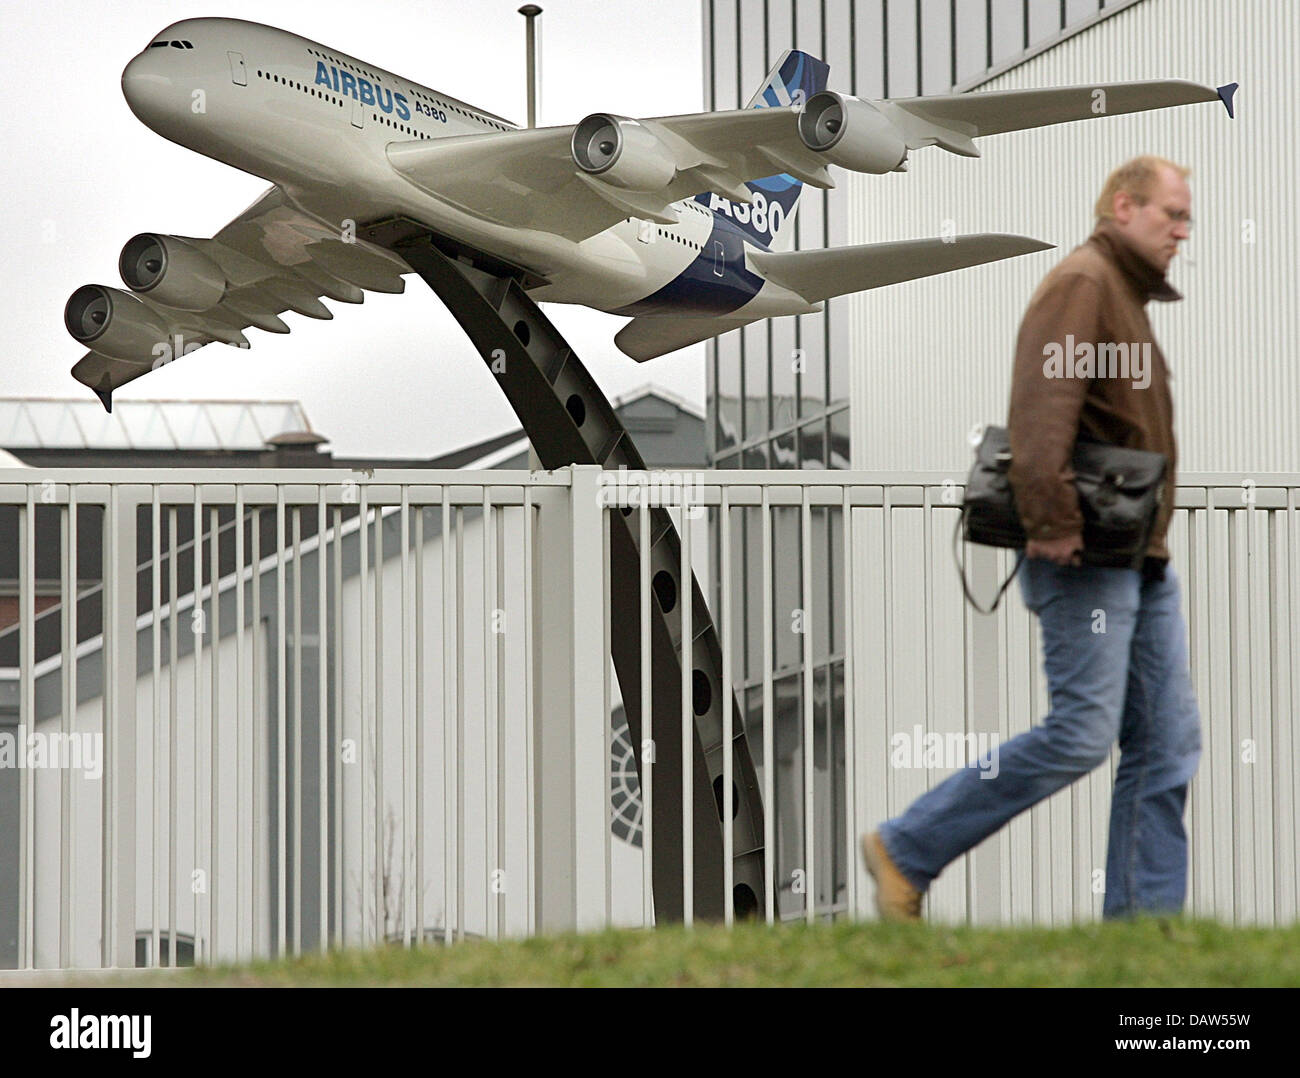 An employee of the Airbus plant Nordenham leaves the company grounds in front of an Airbus A380 model in Nordenham, Germany, Tuesday, 20 February 2007. The French Prime Minister had announced that 10.000 jobs were to be cut at Airbus Europe wide. Photo: Ingo Wagner Stock Photo